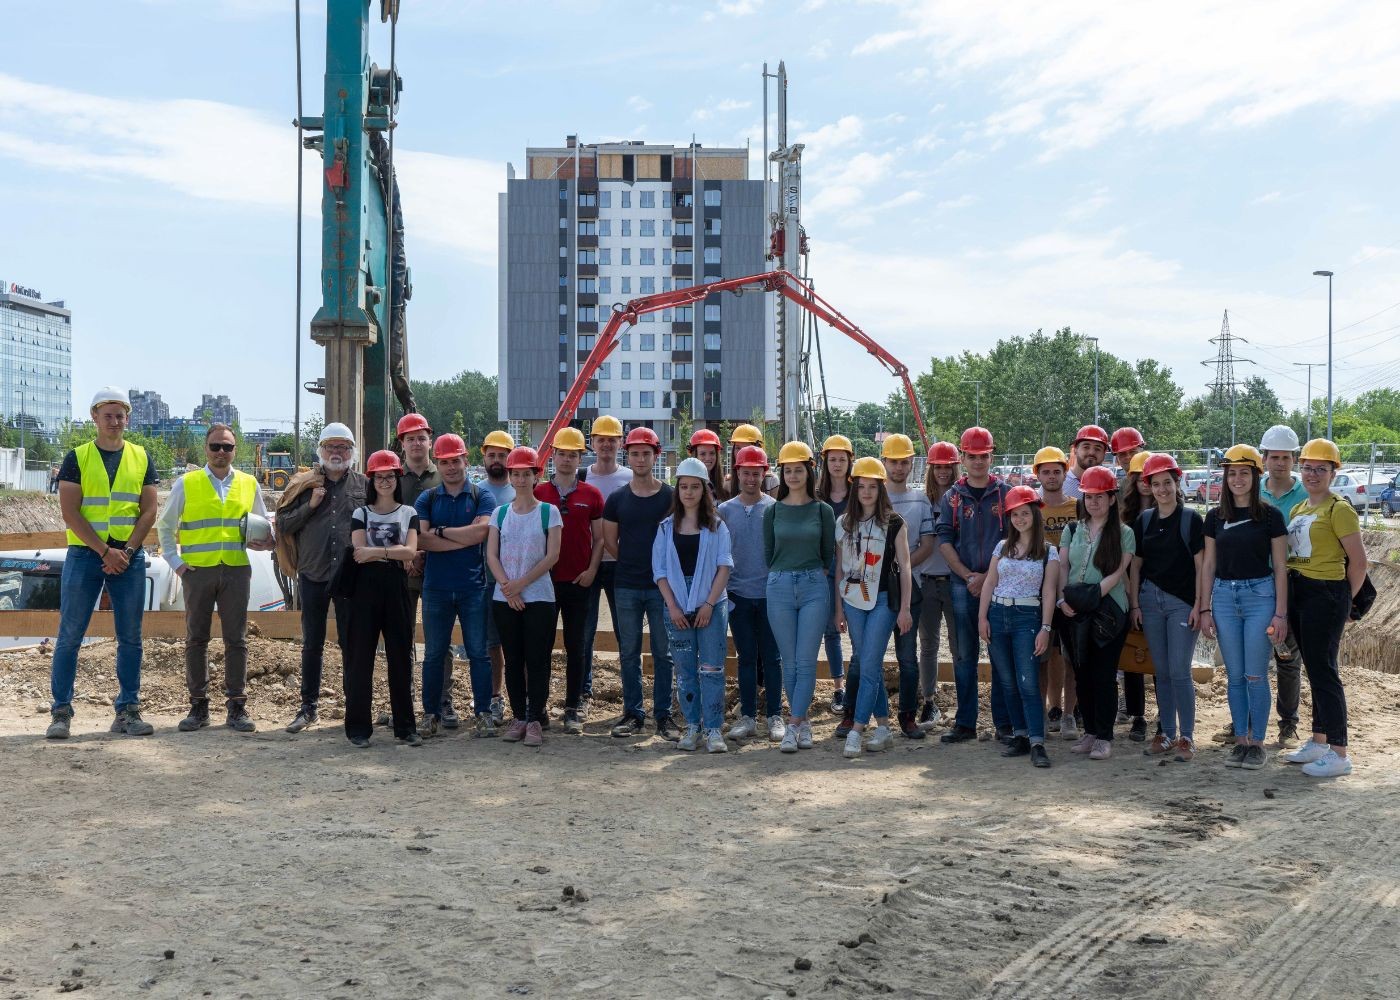 Students of the Faculty of Civil Engineering at the University of Belgrade visiting the construction site of 'Lastavice - Block 58'.